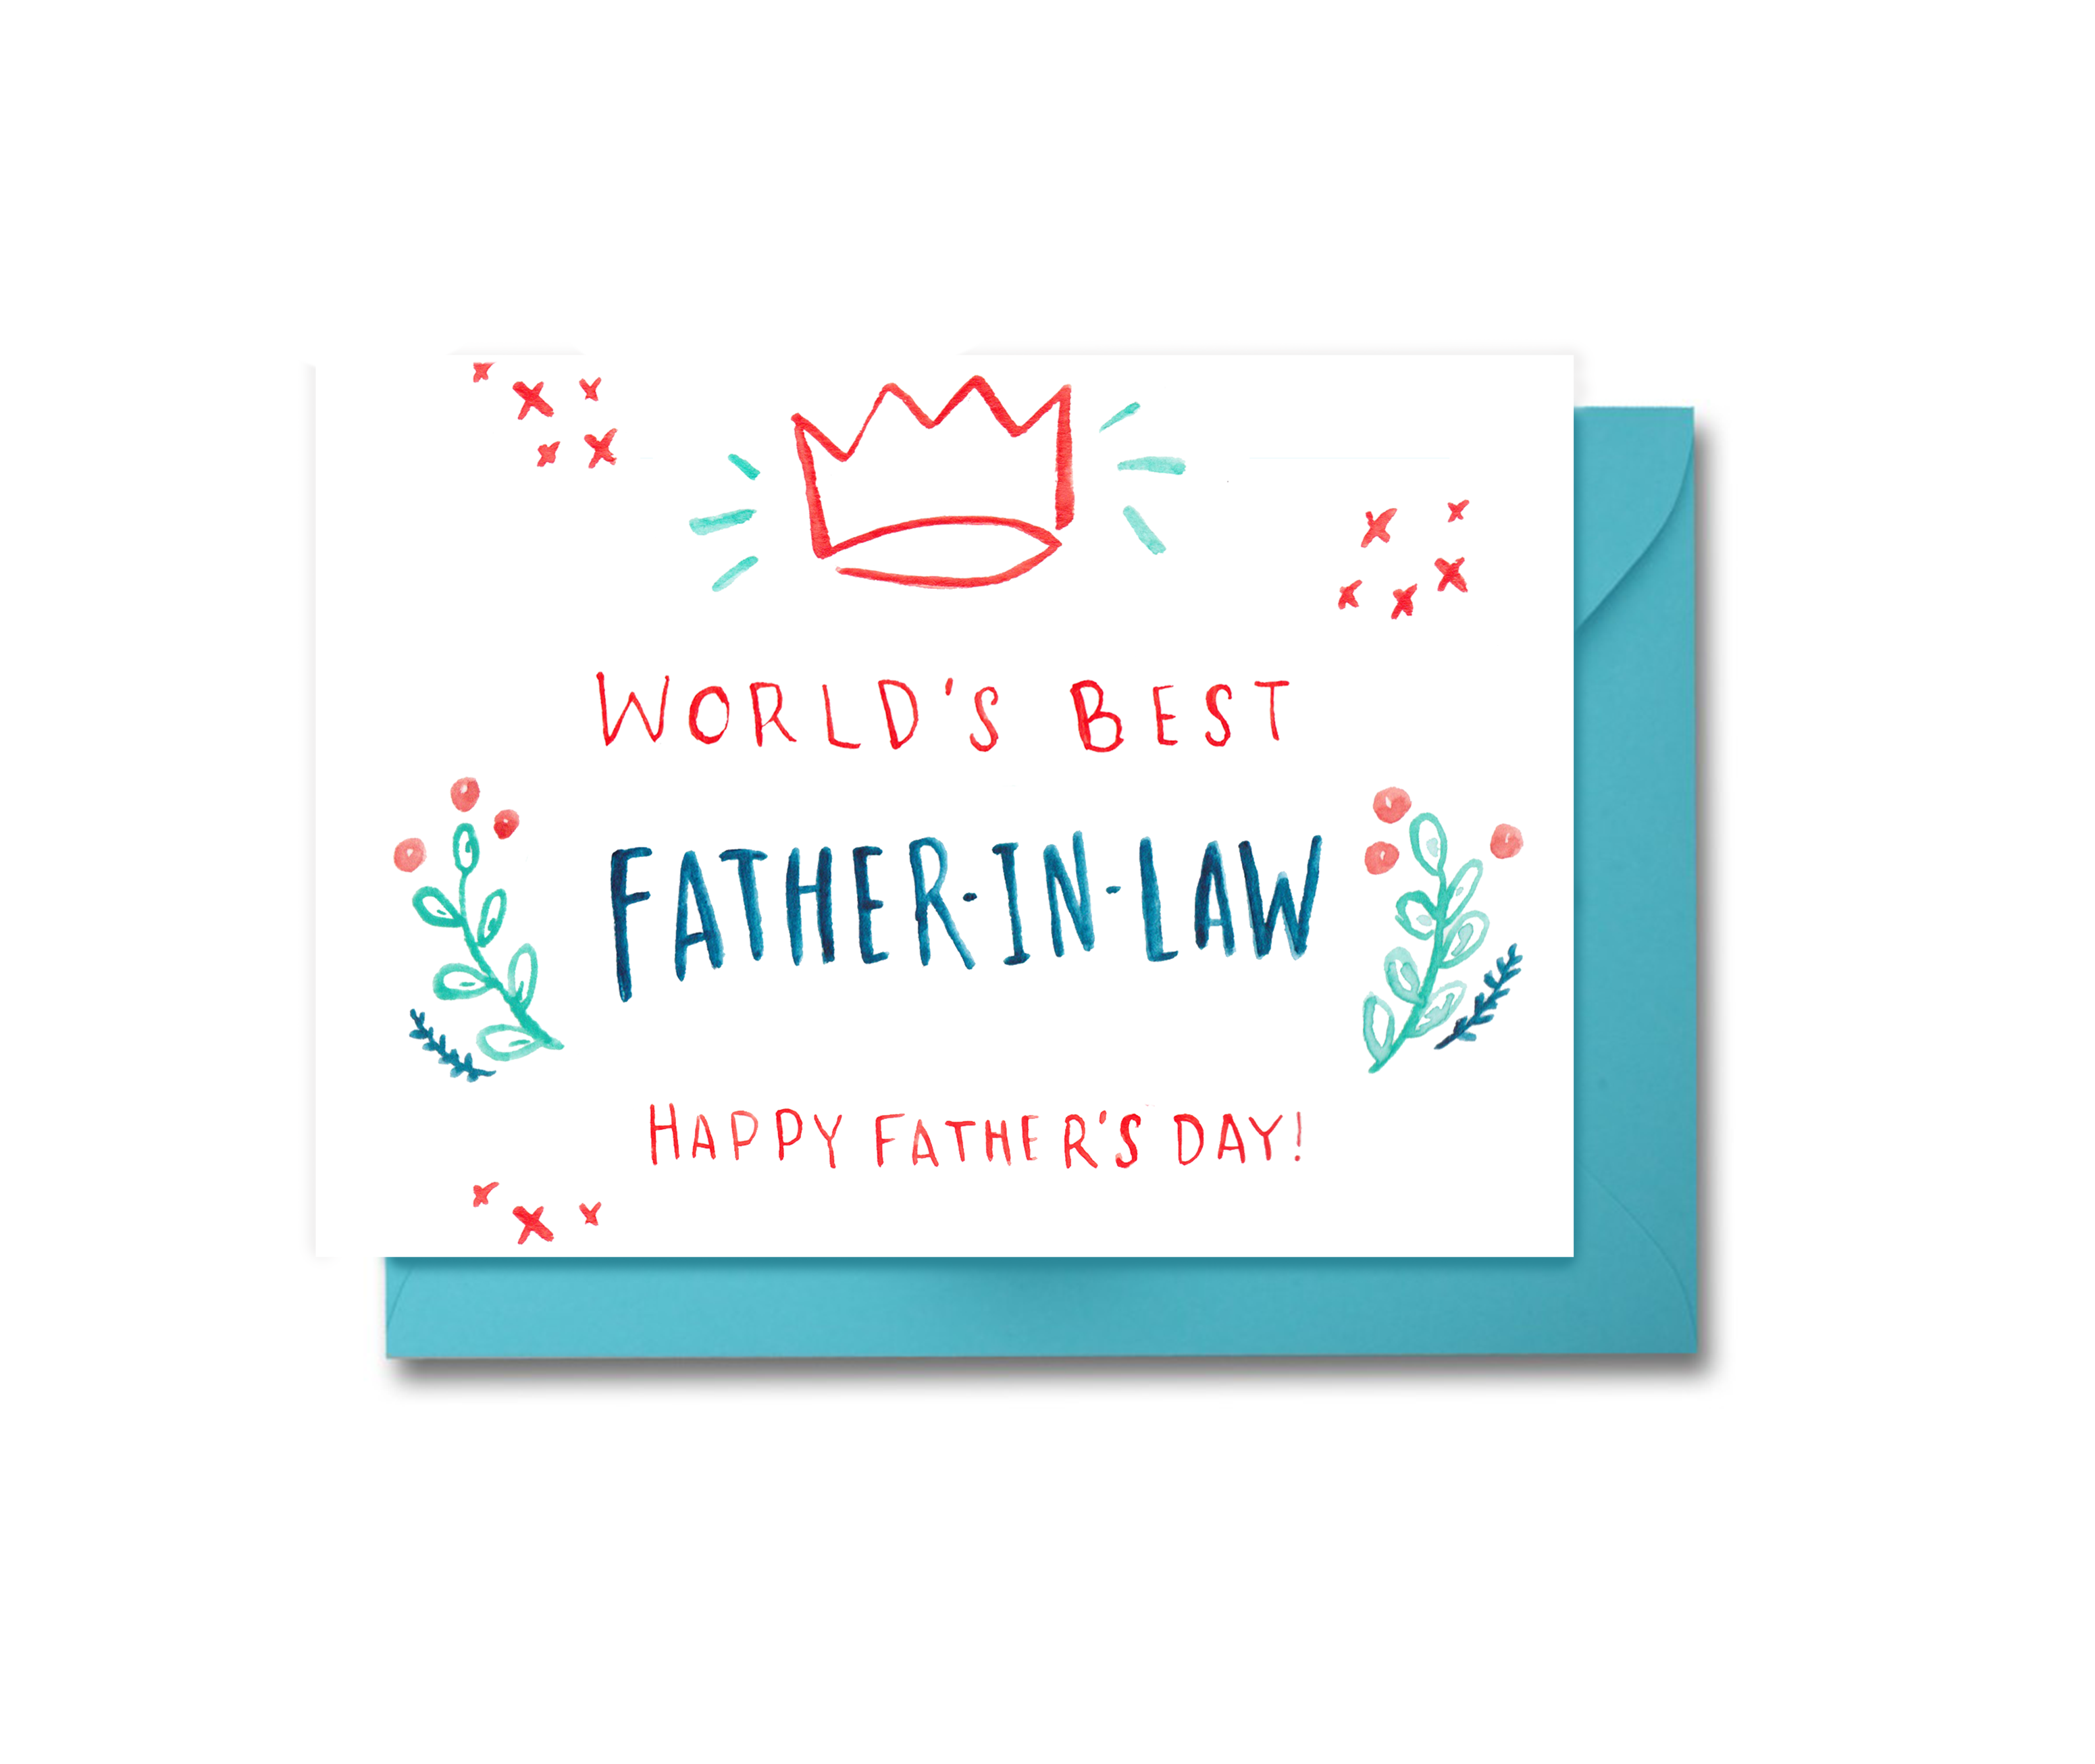 Father Figure Father's Day Card - Father's Day for Step Dad - Fathers Day Card for Grandpa - Father's Day for Uncle - Father-in-law Father's Day